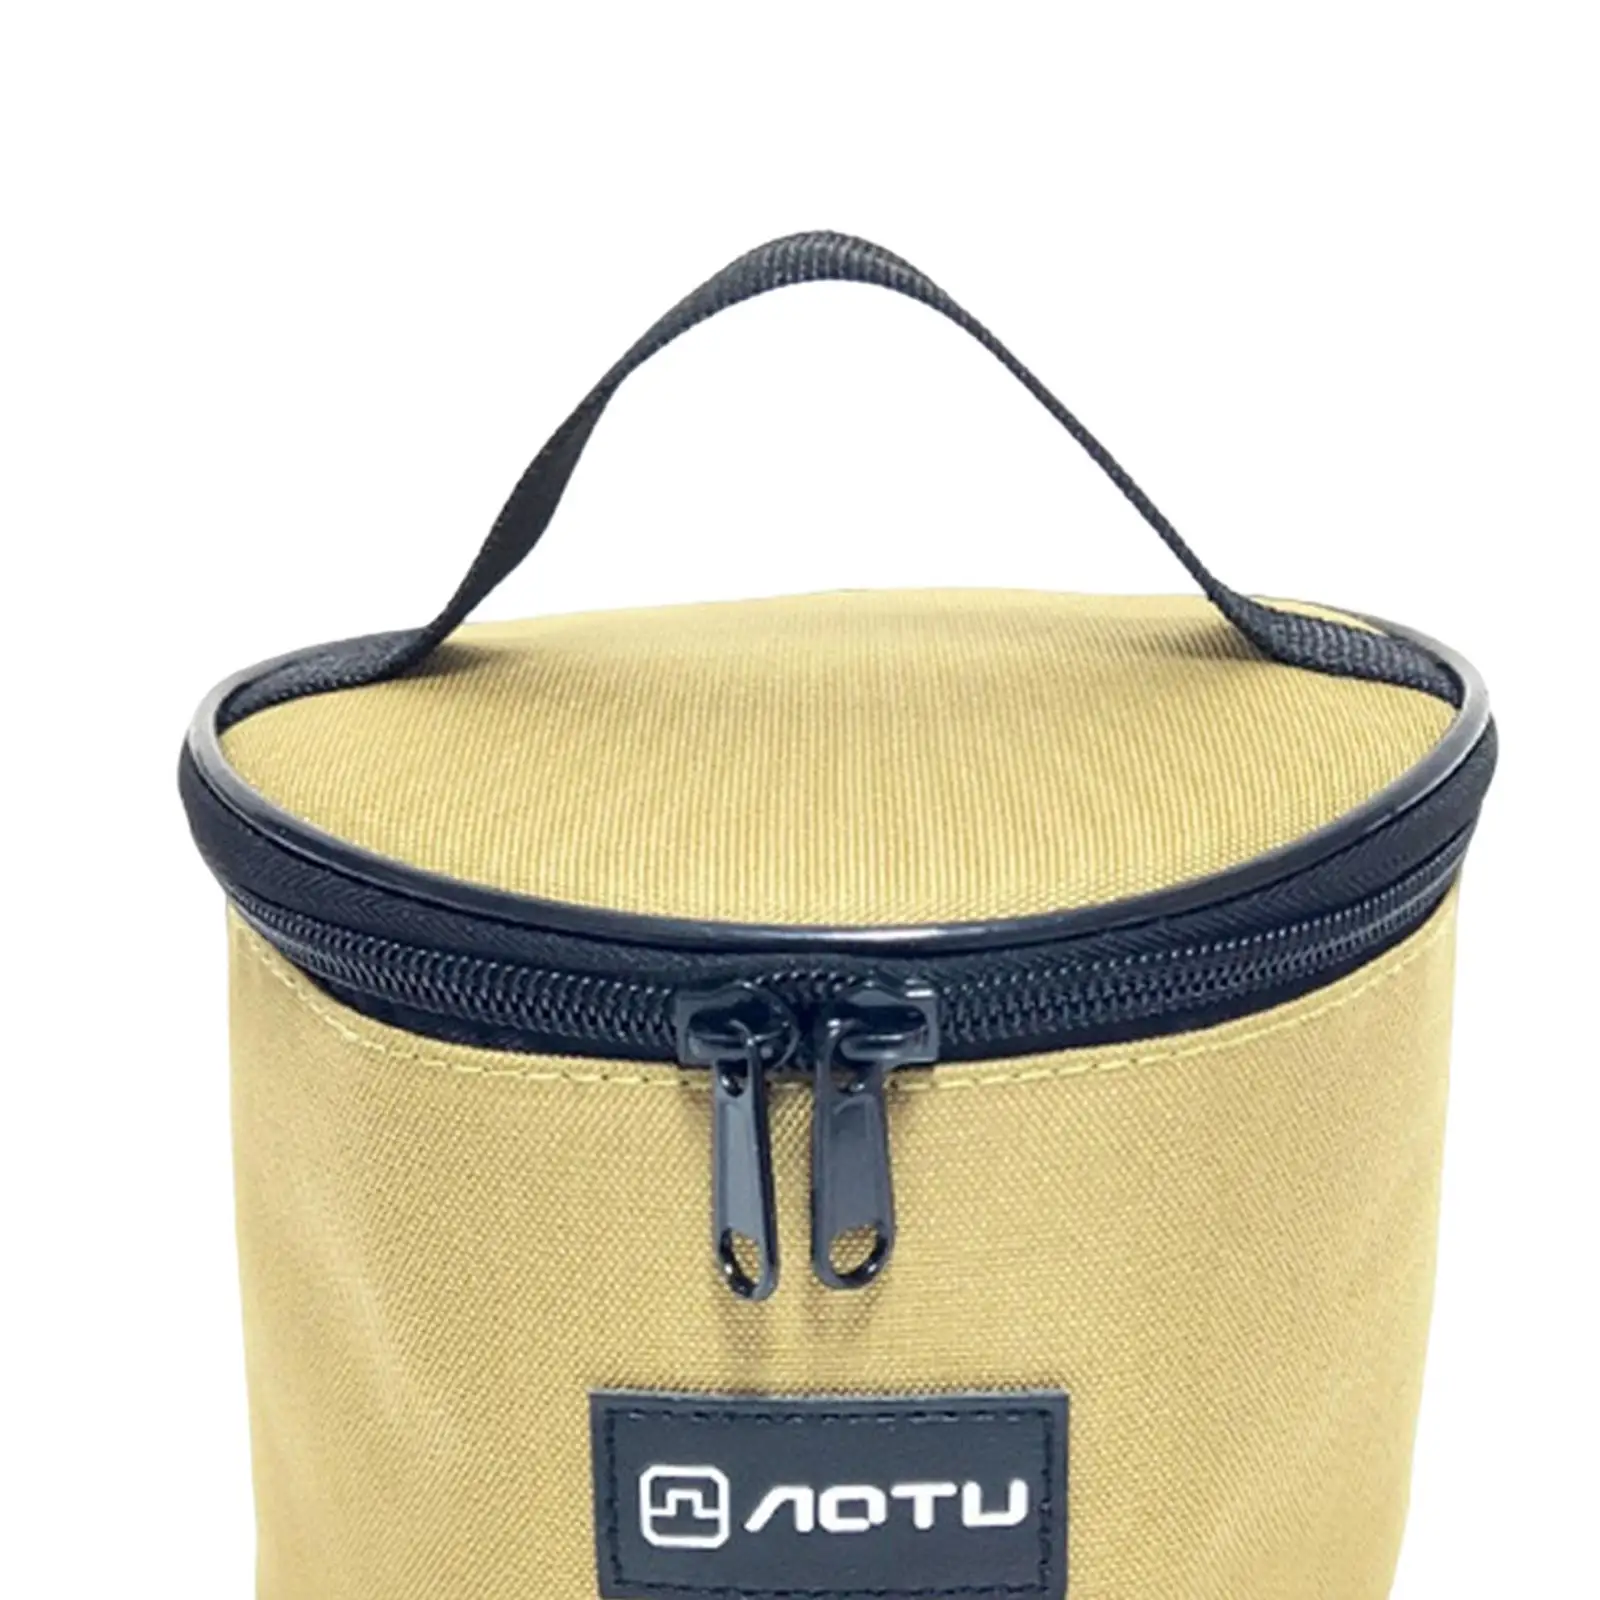 Portable Bowl Storage Bag Accessories Carry Case Tableware Hiking Oxford Outdoor